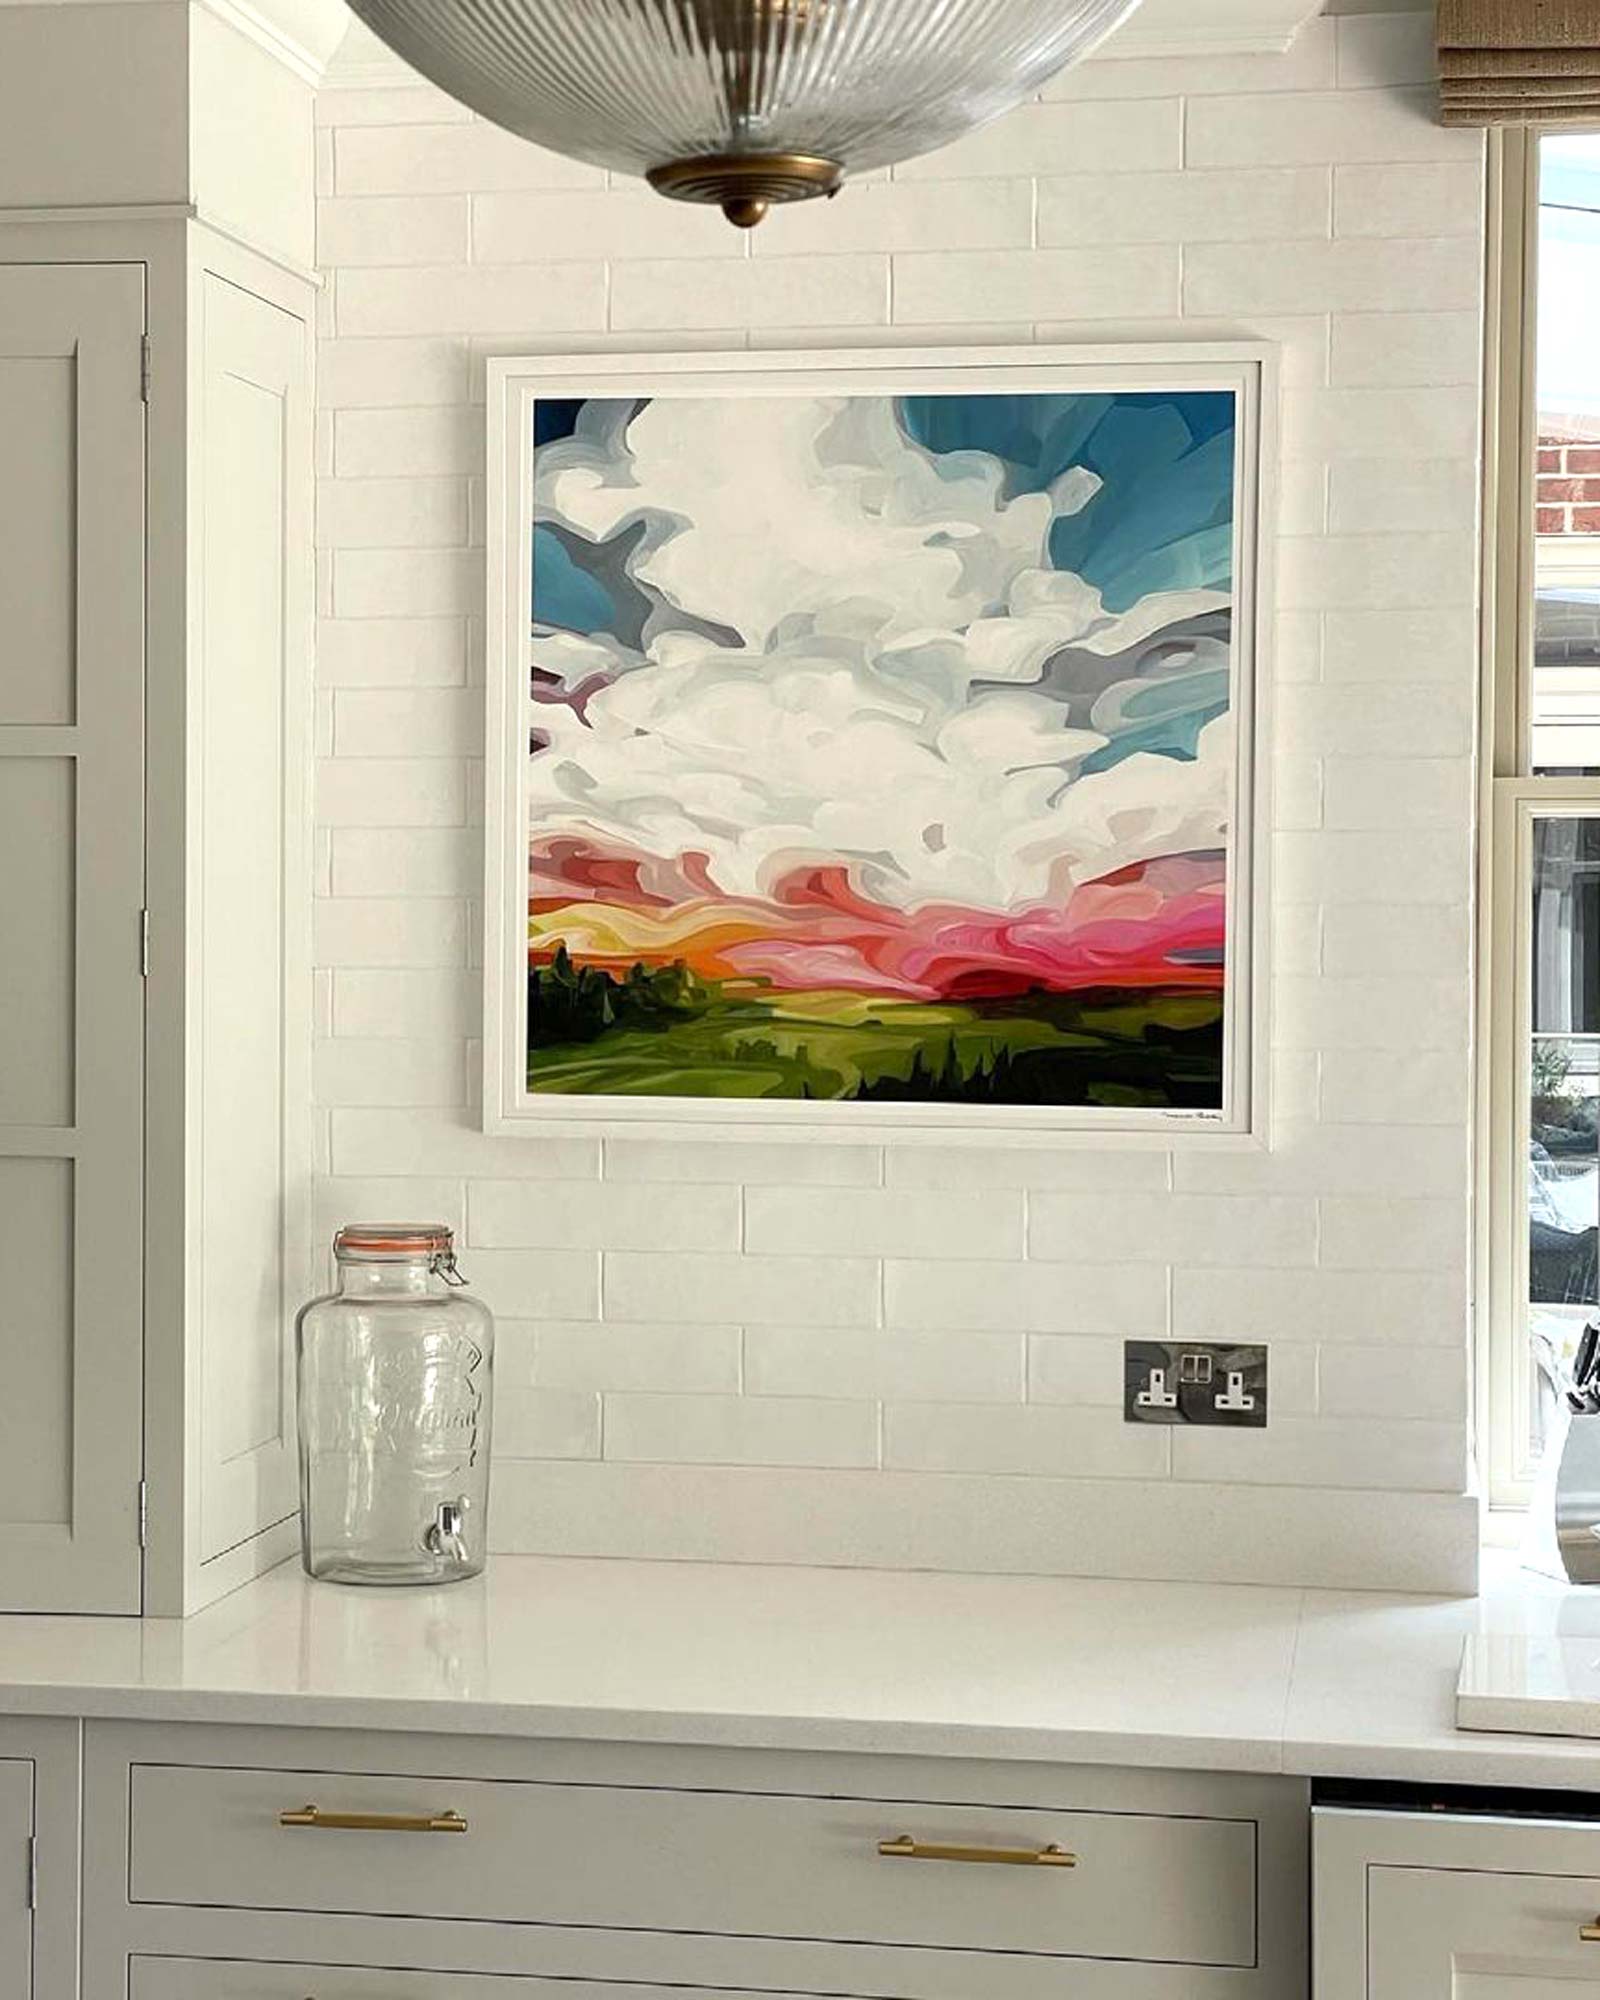 acrylic sky painting abstract skies art print hanging in a white kitchen